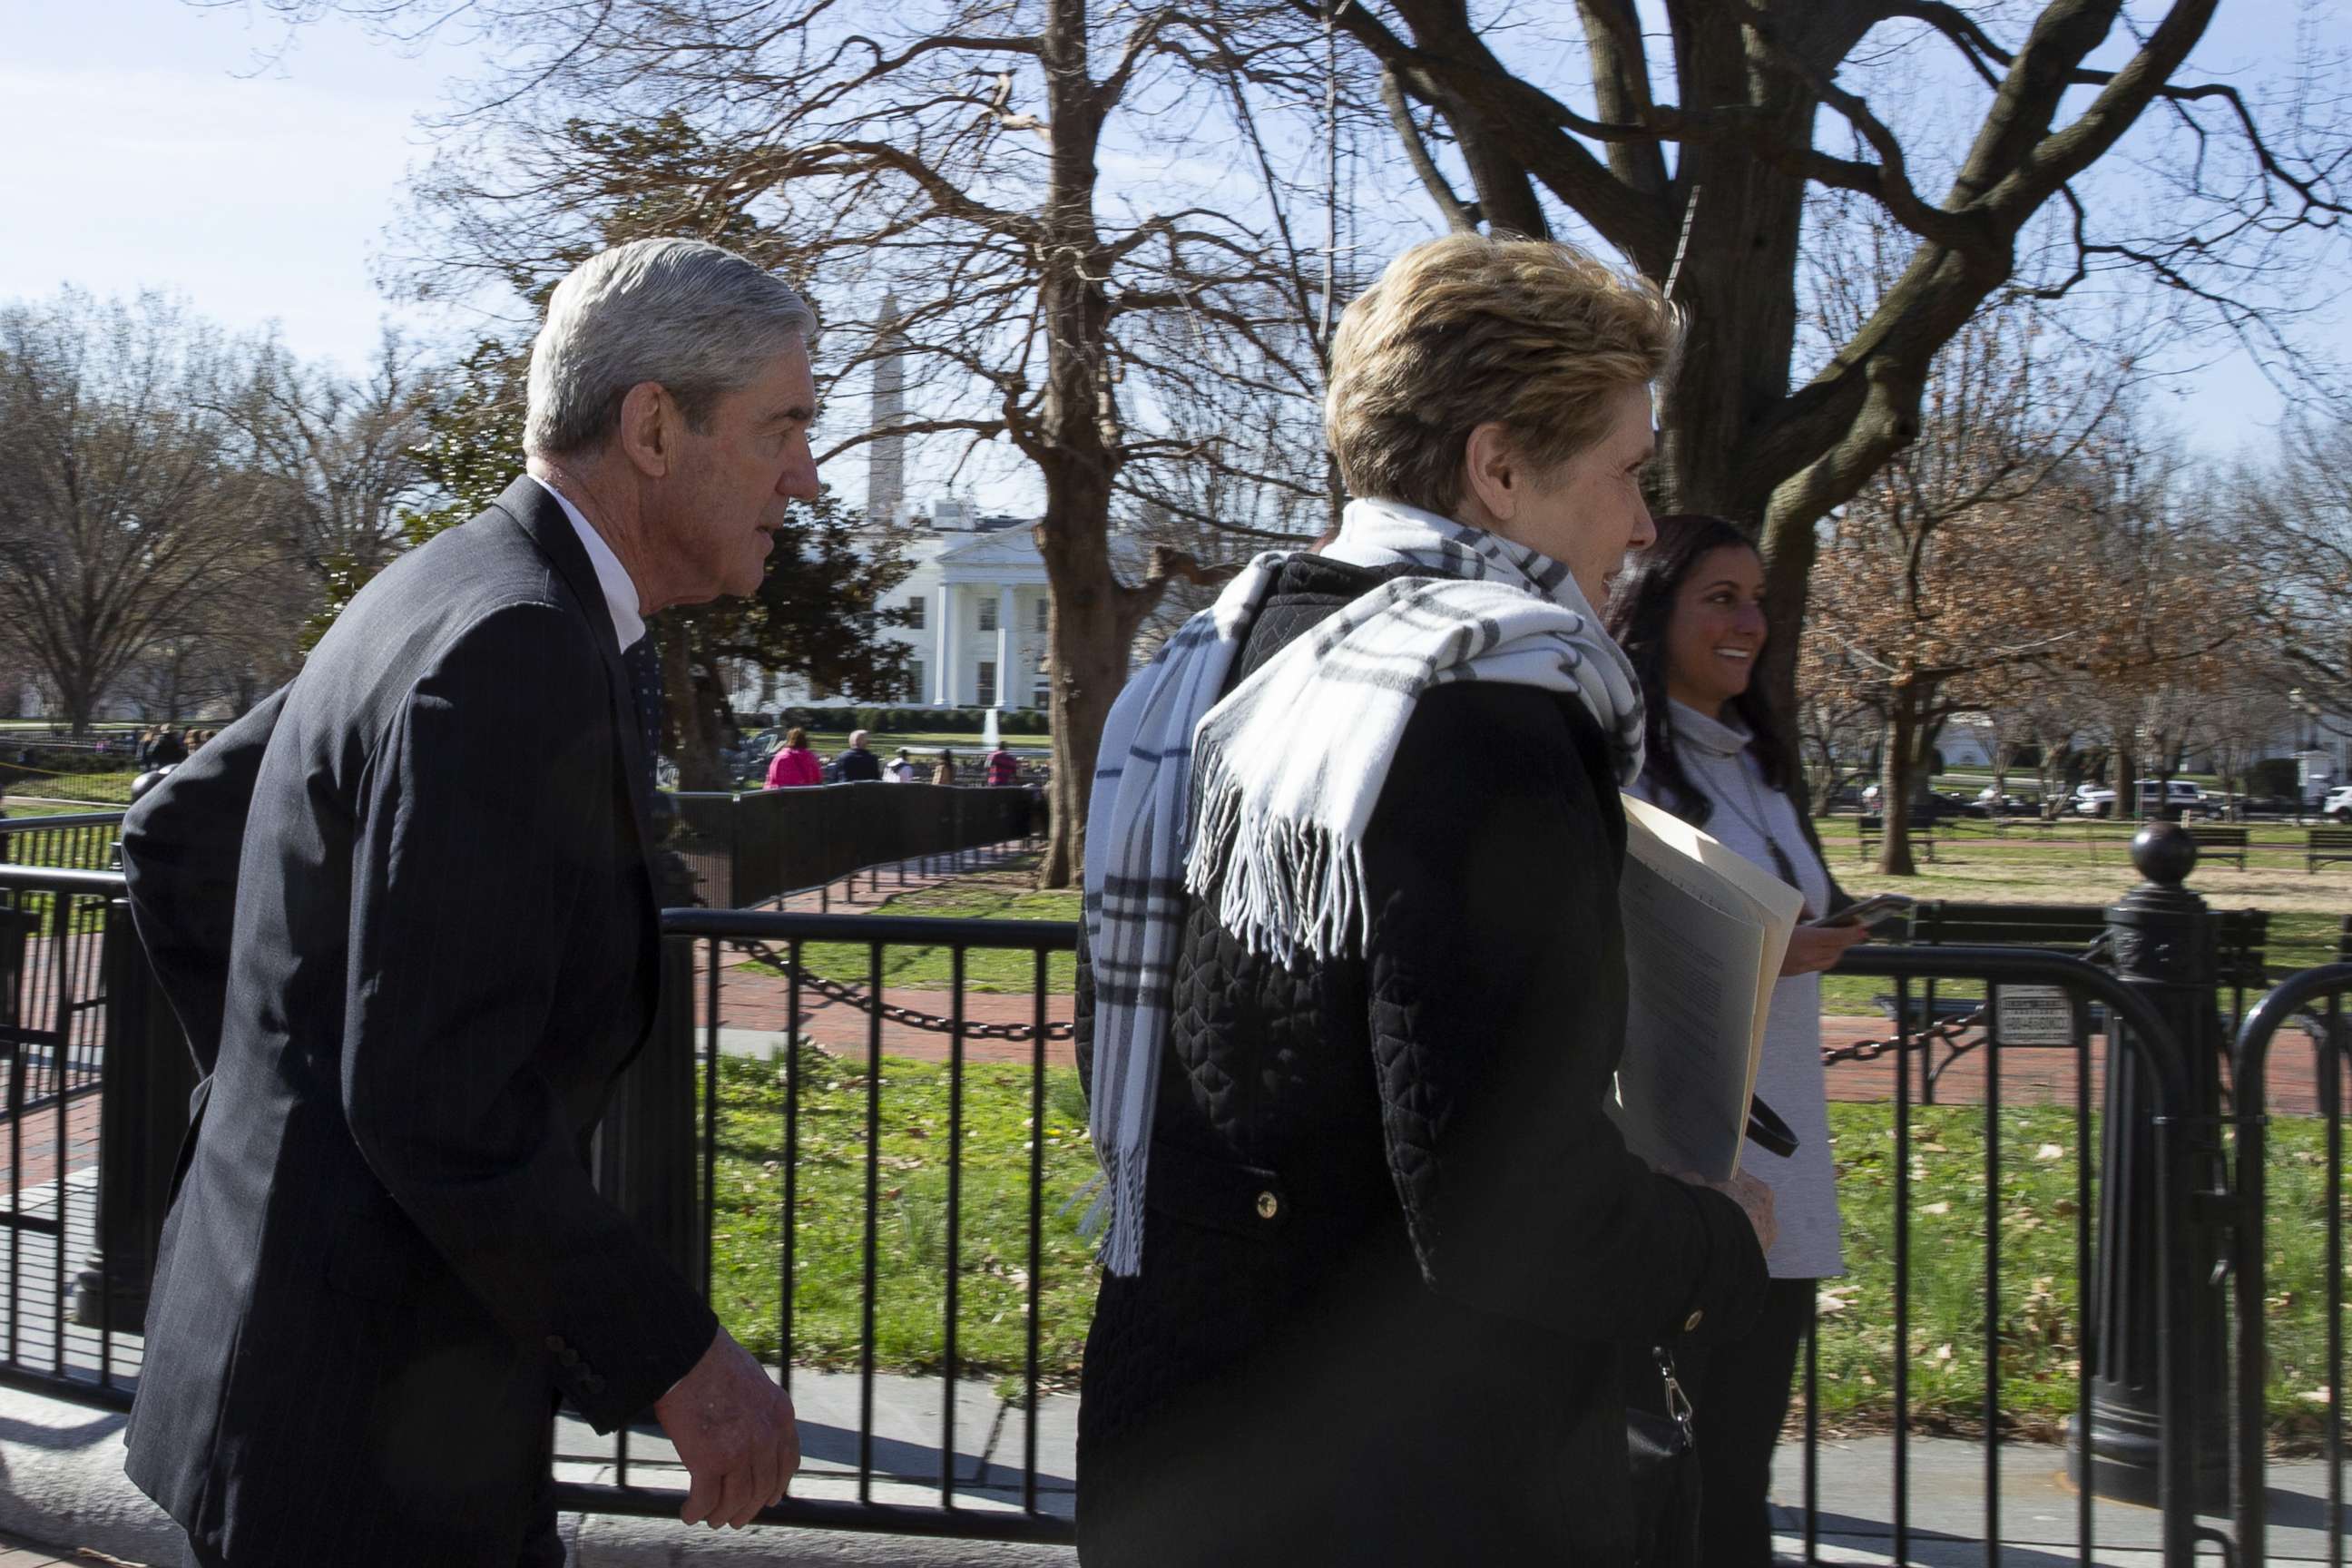 PHOTO: Special Counsel Robert Mueller walks with his wife Ann Mueller after attending church, March 24, 2019, in Washington, D.C. 